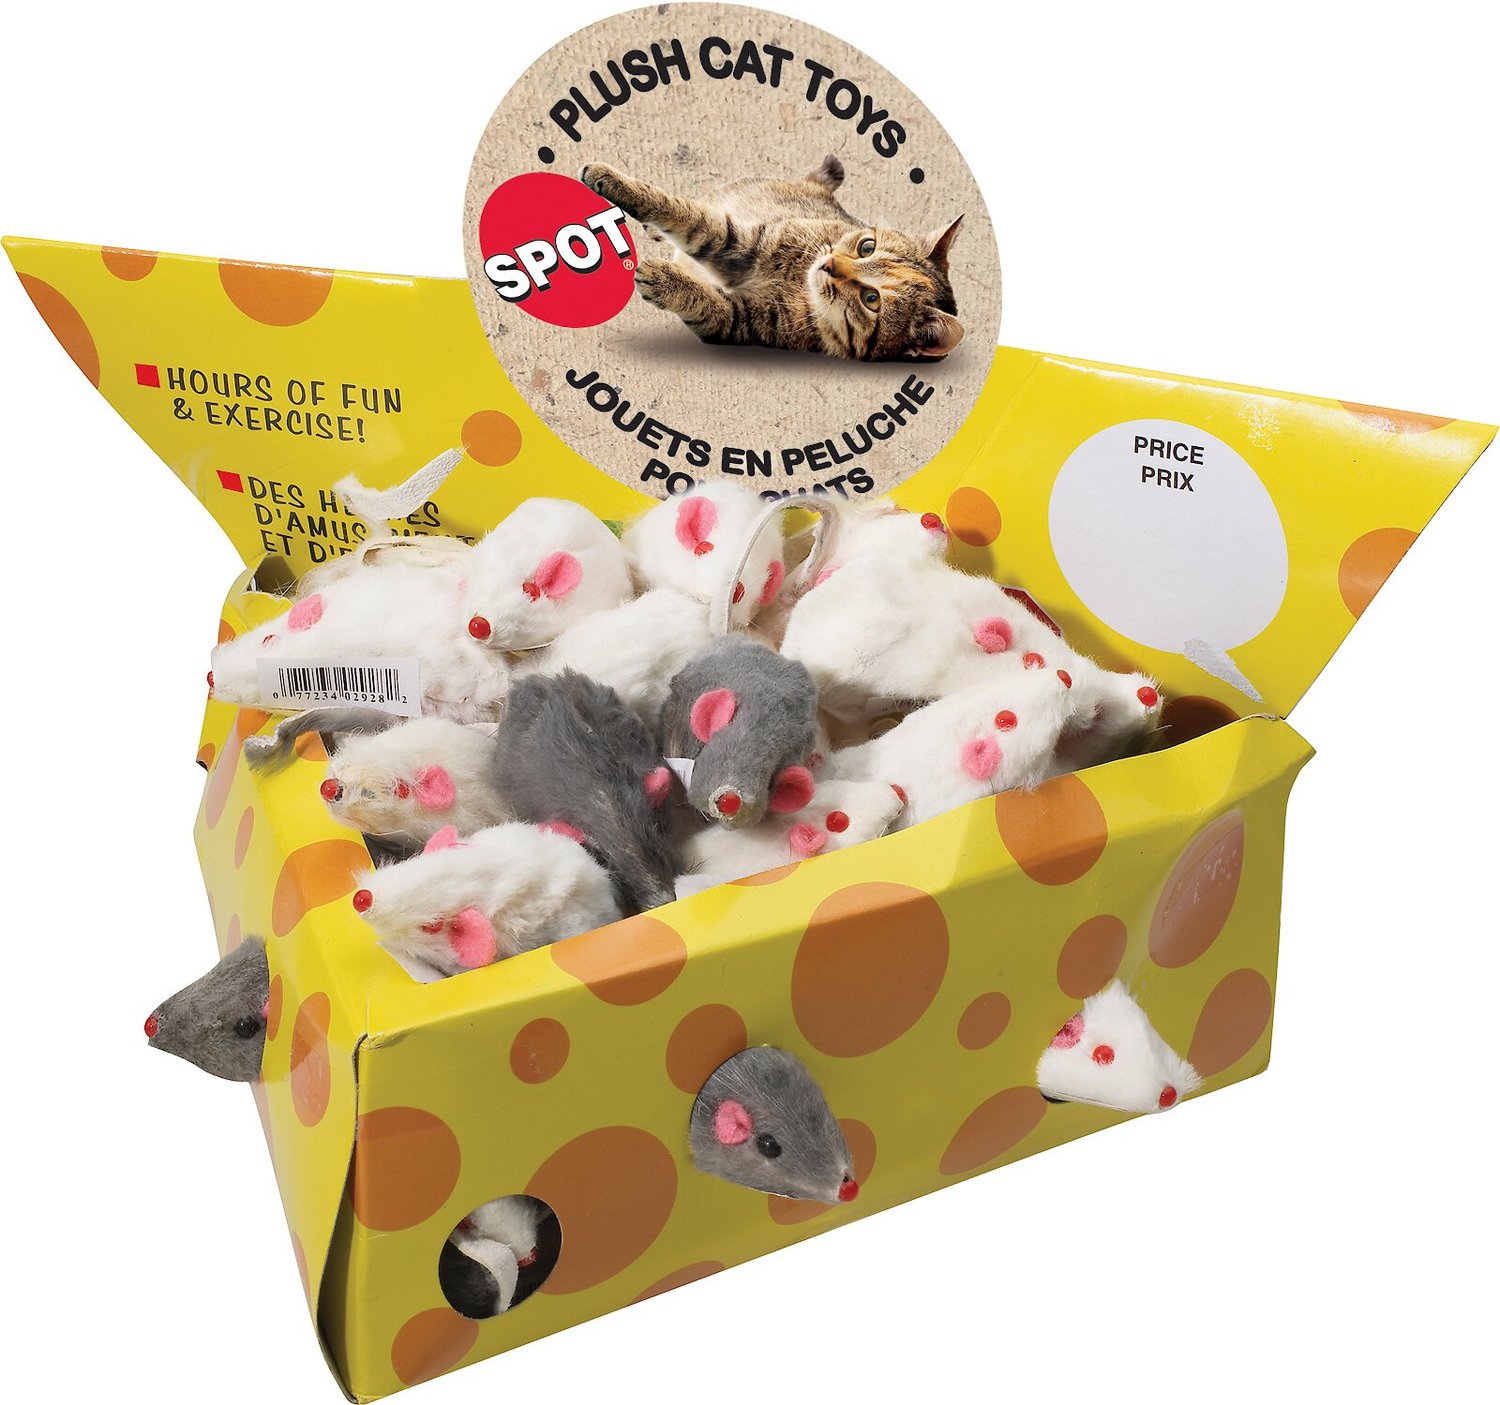 Ethical Pet Spot Felt Mice 6 countAssorted Colorful Cat Toys with Catnip 